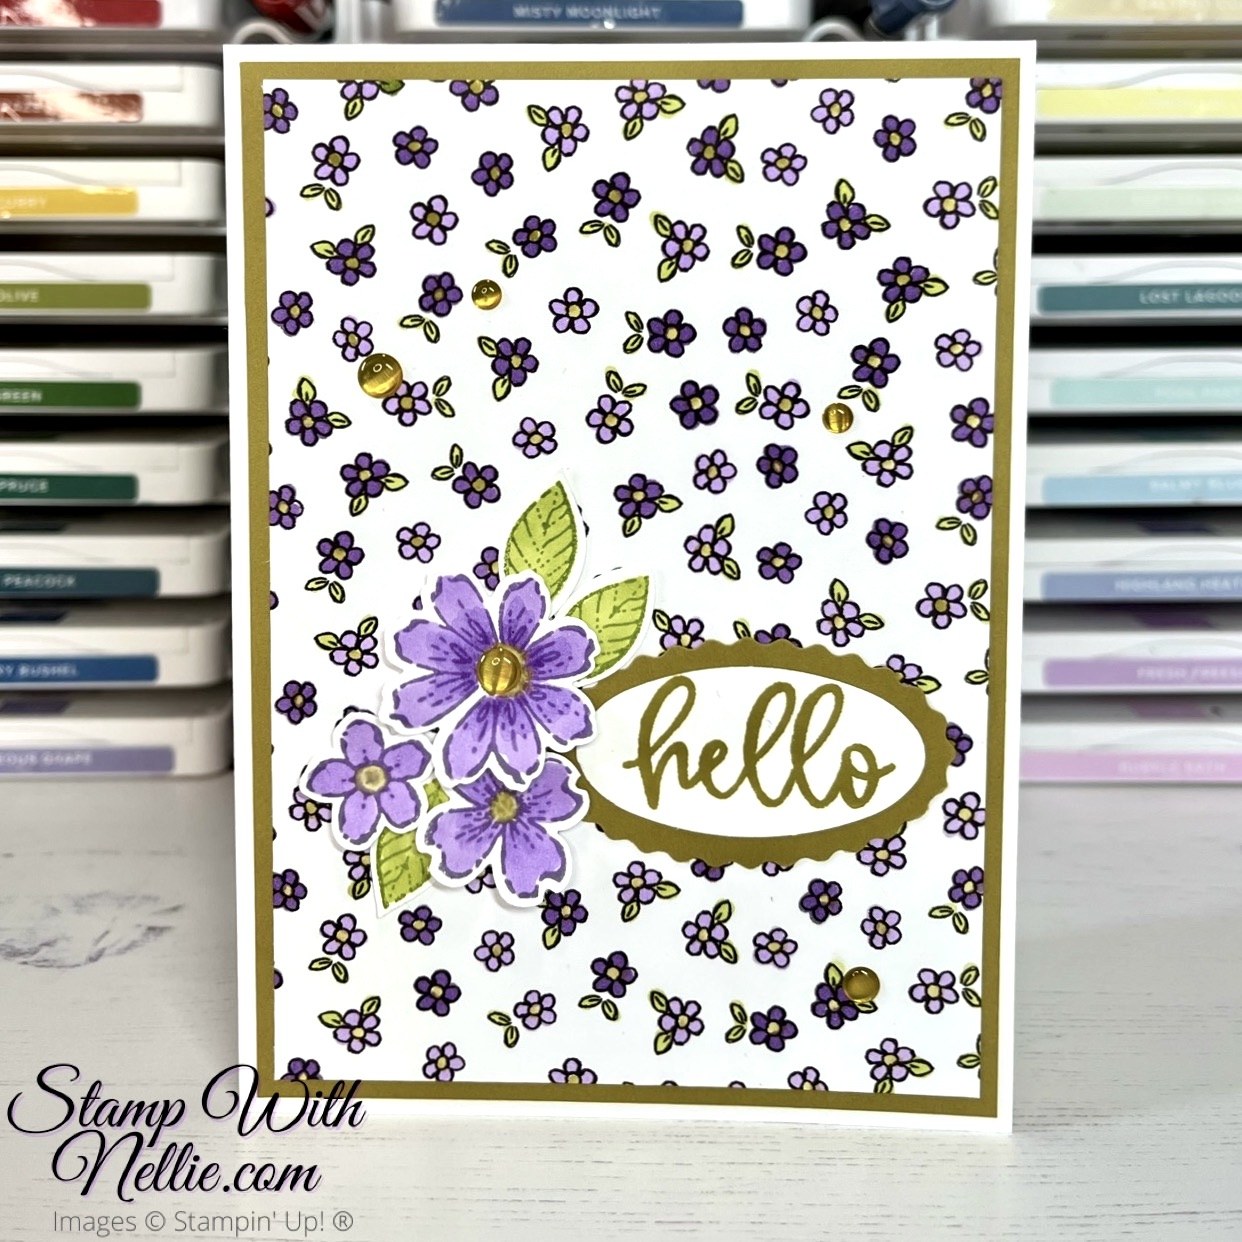 Image of a floral card made with Stampin' Up!'s Petal Park stamp set for the flowers. The sentiment says hello.